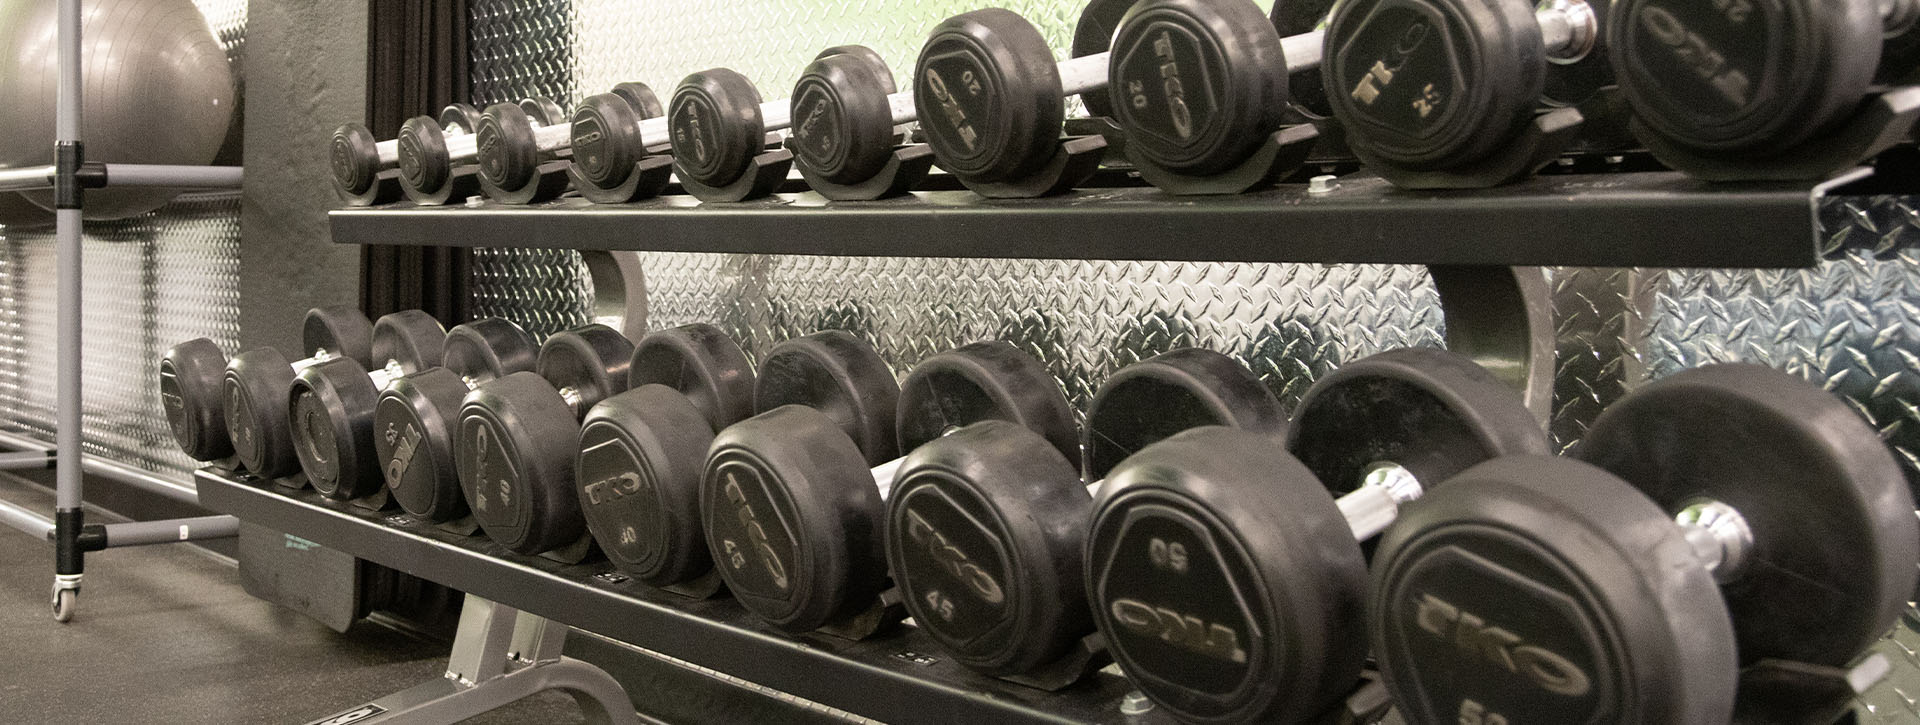 free-weights-workout-modern-gym-near-me-fort-smith-ar